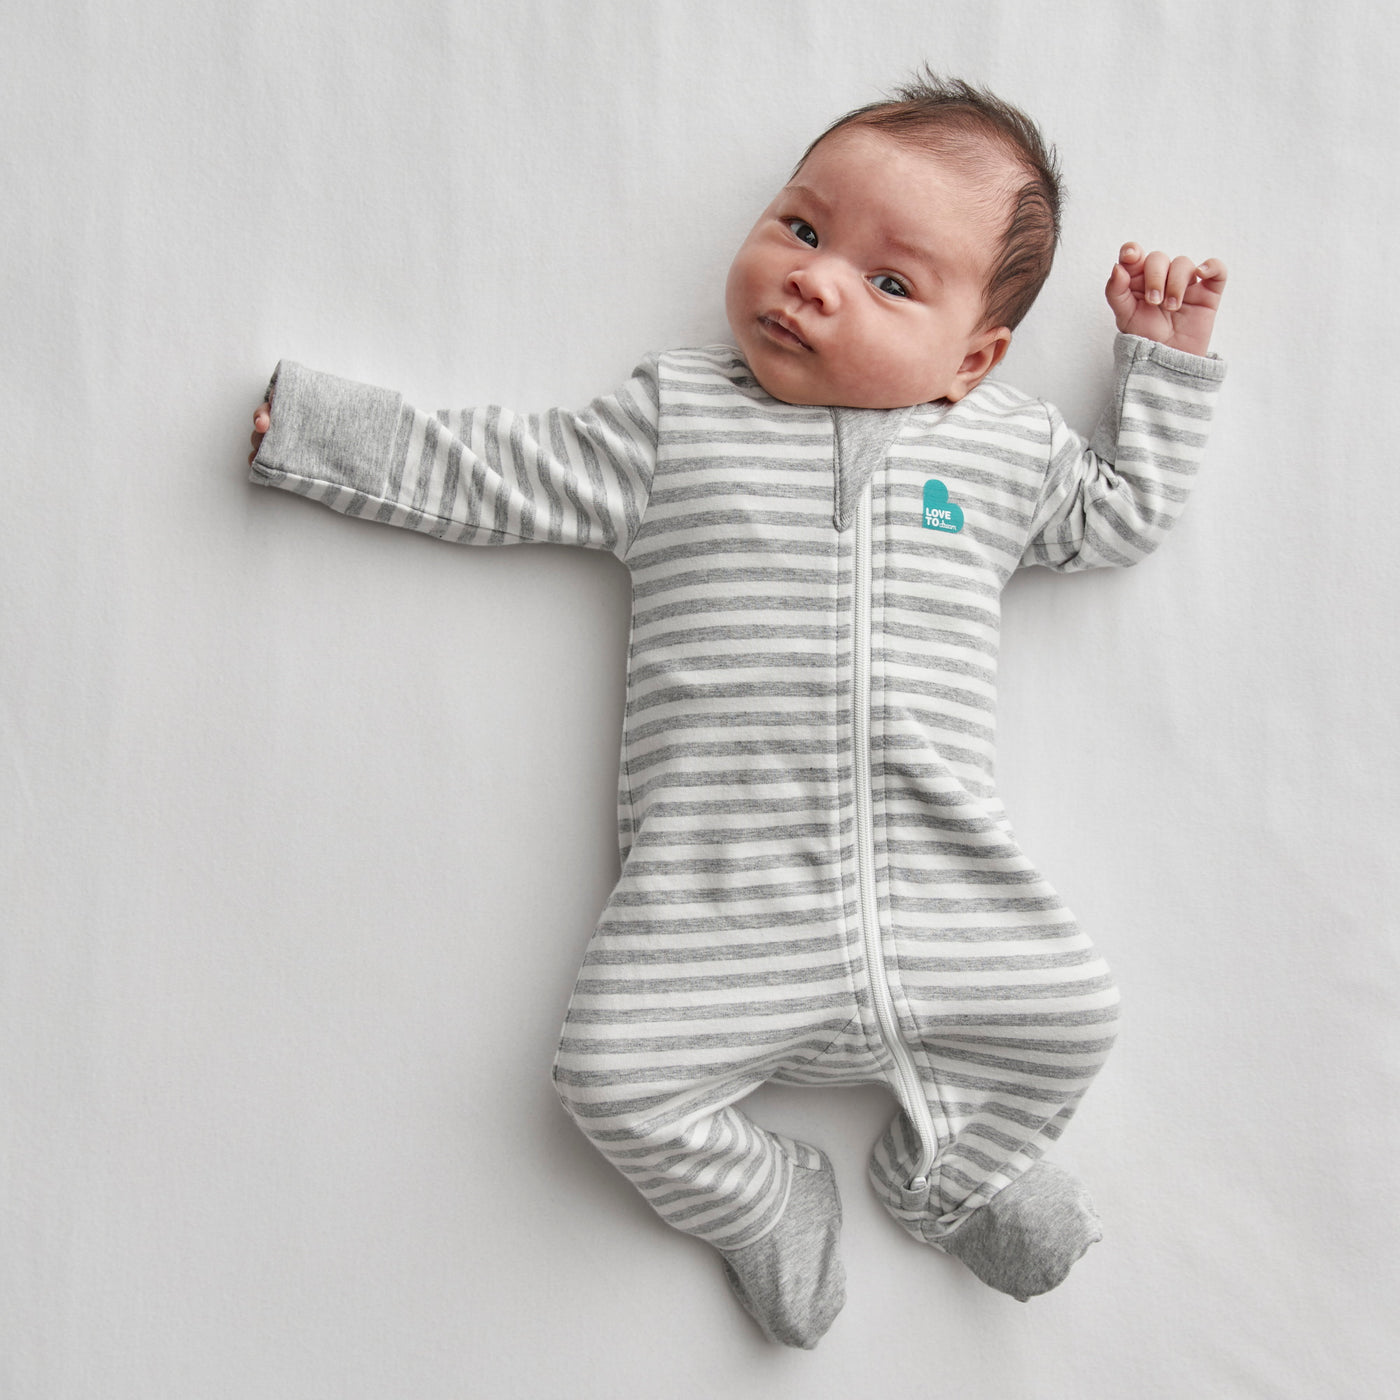 The Love To Dream™ Romper has been designed for all day comfort through sleep & play. With enclosed feet and convertible sleeves, this onesie style romper is perfect on its own, or for layering under Love To Dream™ sleepwear. Online exclusive range.